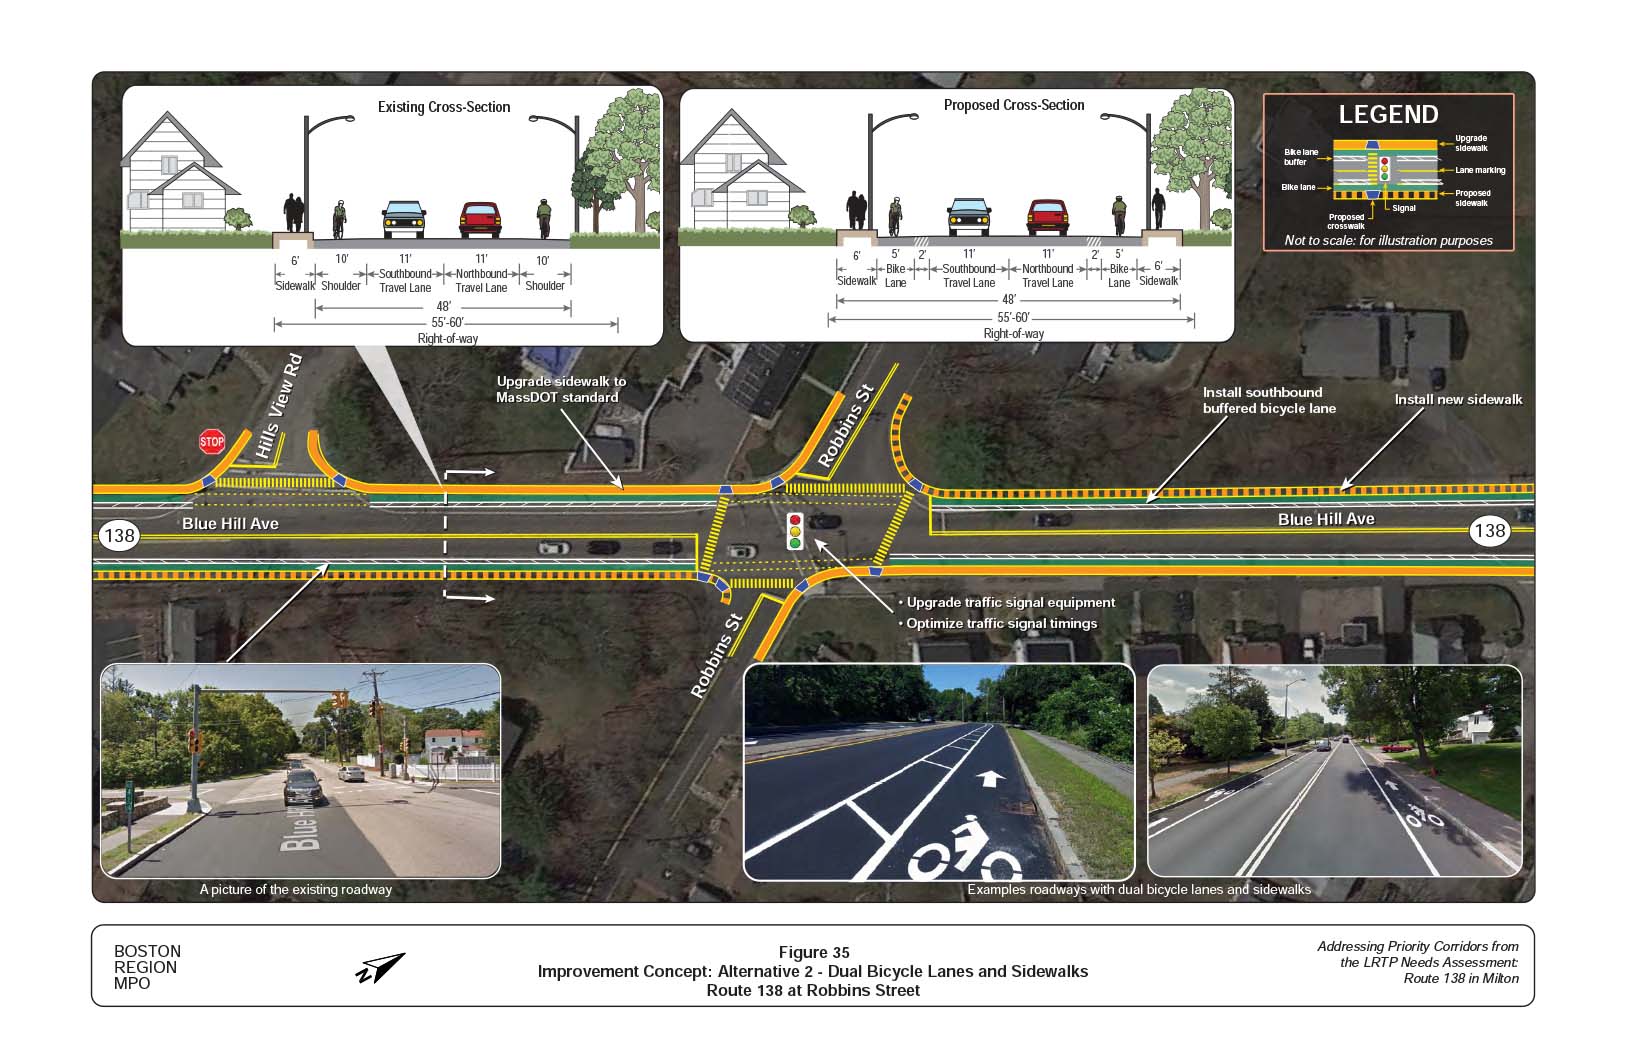 Figure 35 is an aerial photo of Route 138 at Robbins Street showing Alternative 2, dual bicycle lanes and sidewalks, and overlays showing the existing and proposed cross-sections.